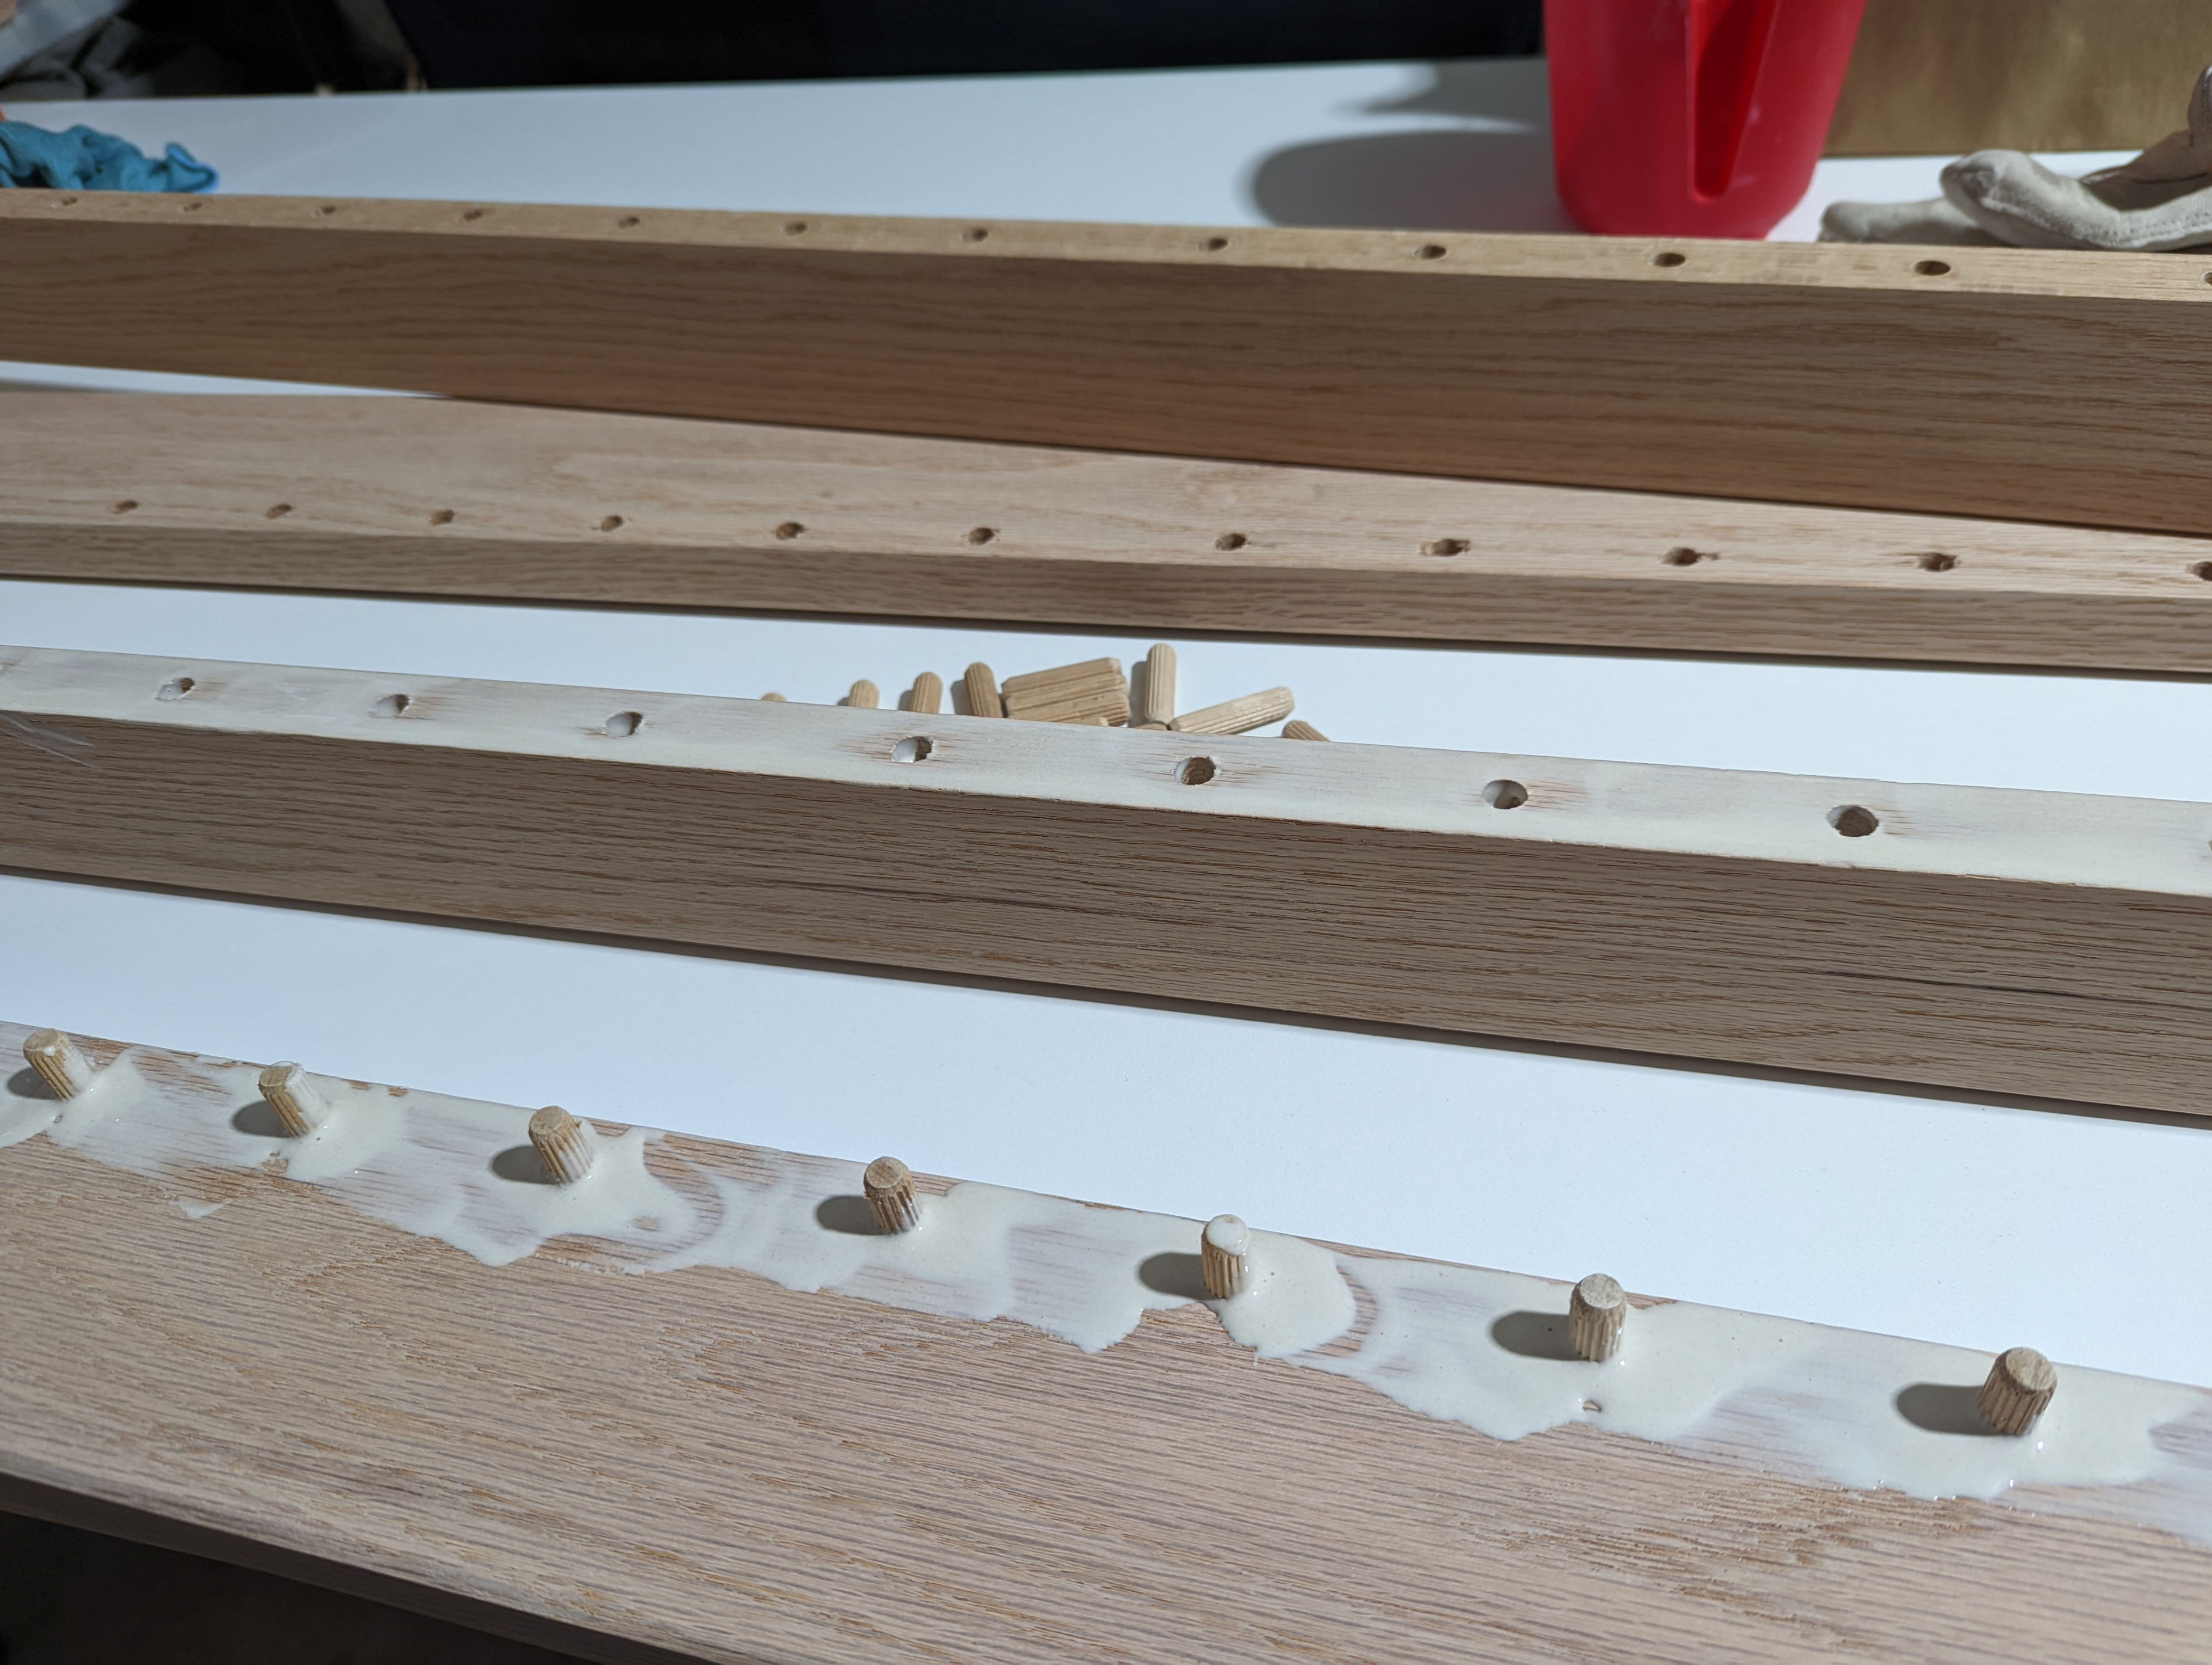 My gluing strategy was to first pour glue into the holes, insert the dowels, then pour glue around them and smear it a bit, and then glue to other board and join them before clamping. It wasn't particularly elegant, but it worked.